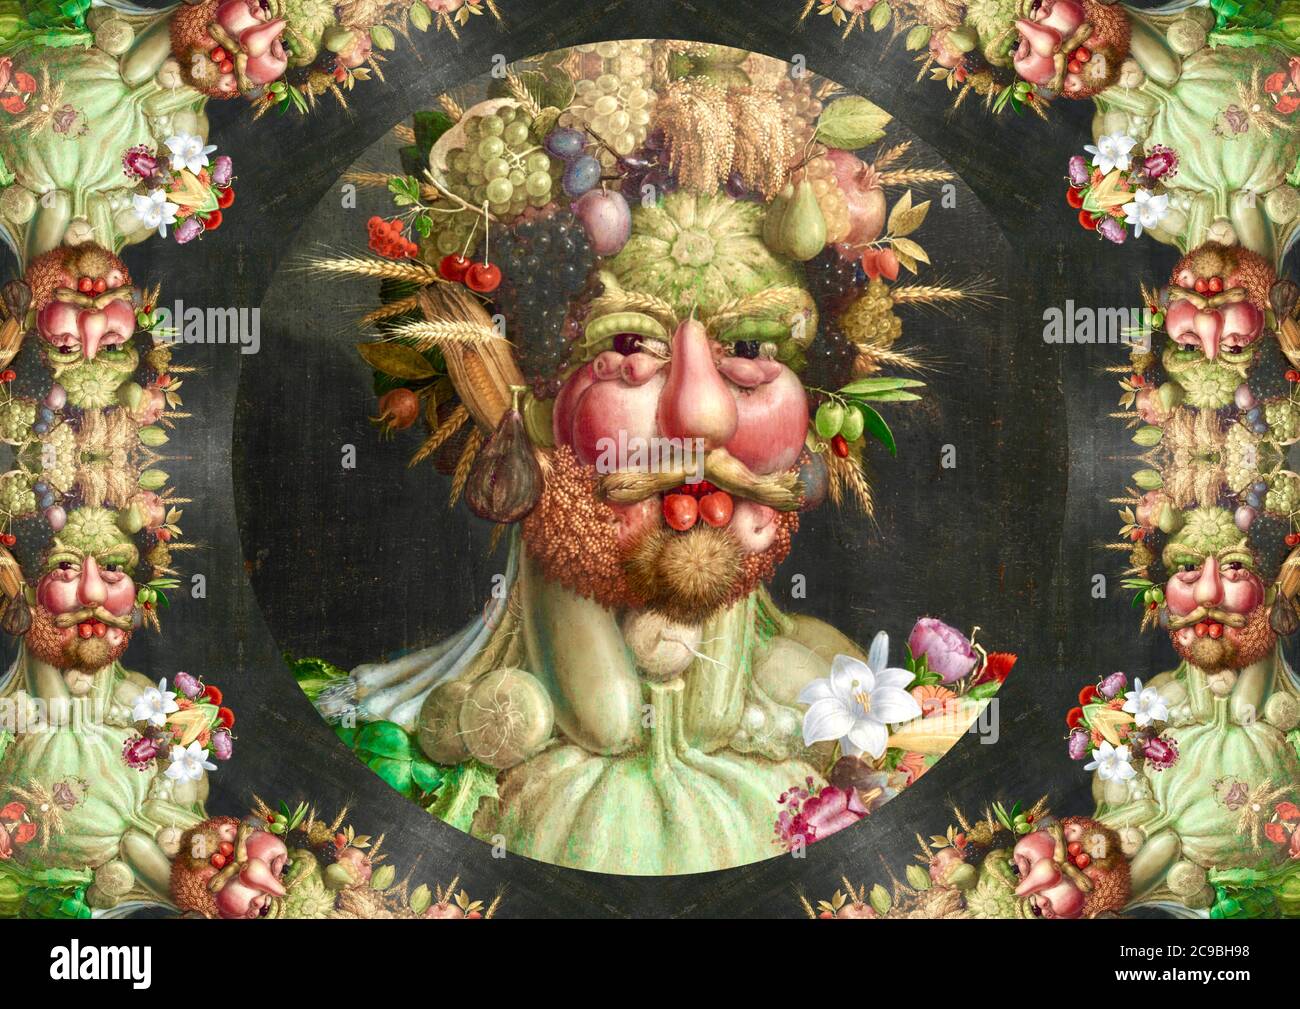 Reworkings of Giuseppe Arcimboldo an Italian painter best known for creating imaginative portrait heads made of objects such as fruits, vegetables. Stock Photo